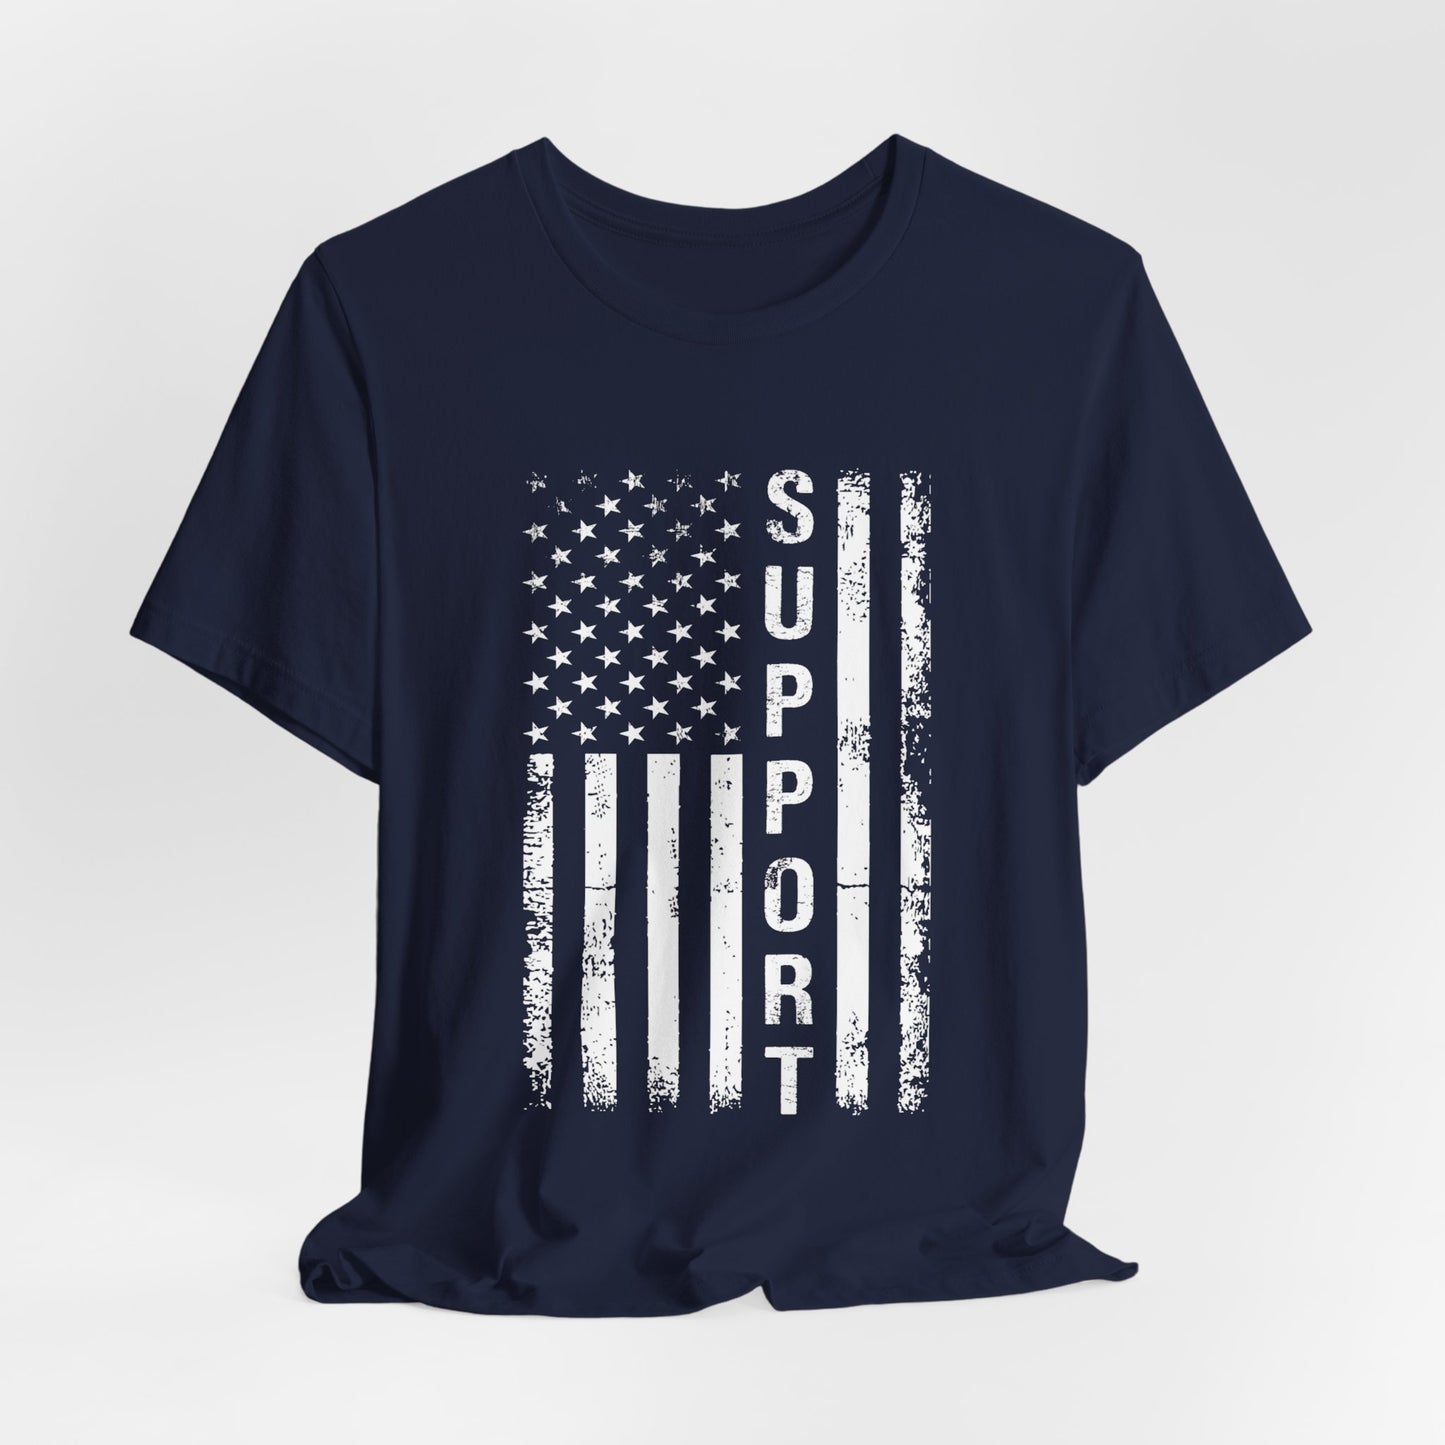 Cancer Advocacy Support American Flag Adult Unisex Tshirt